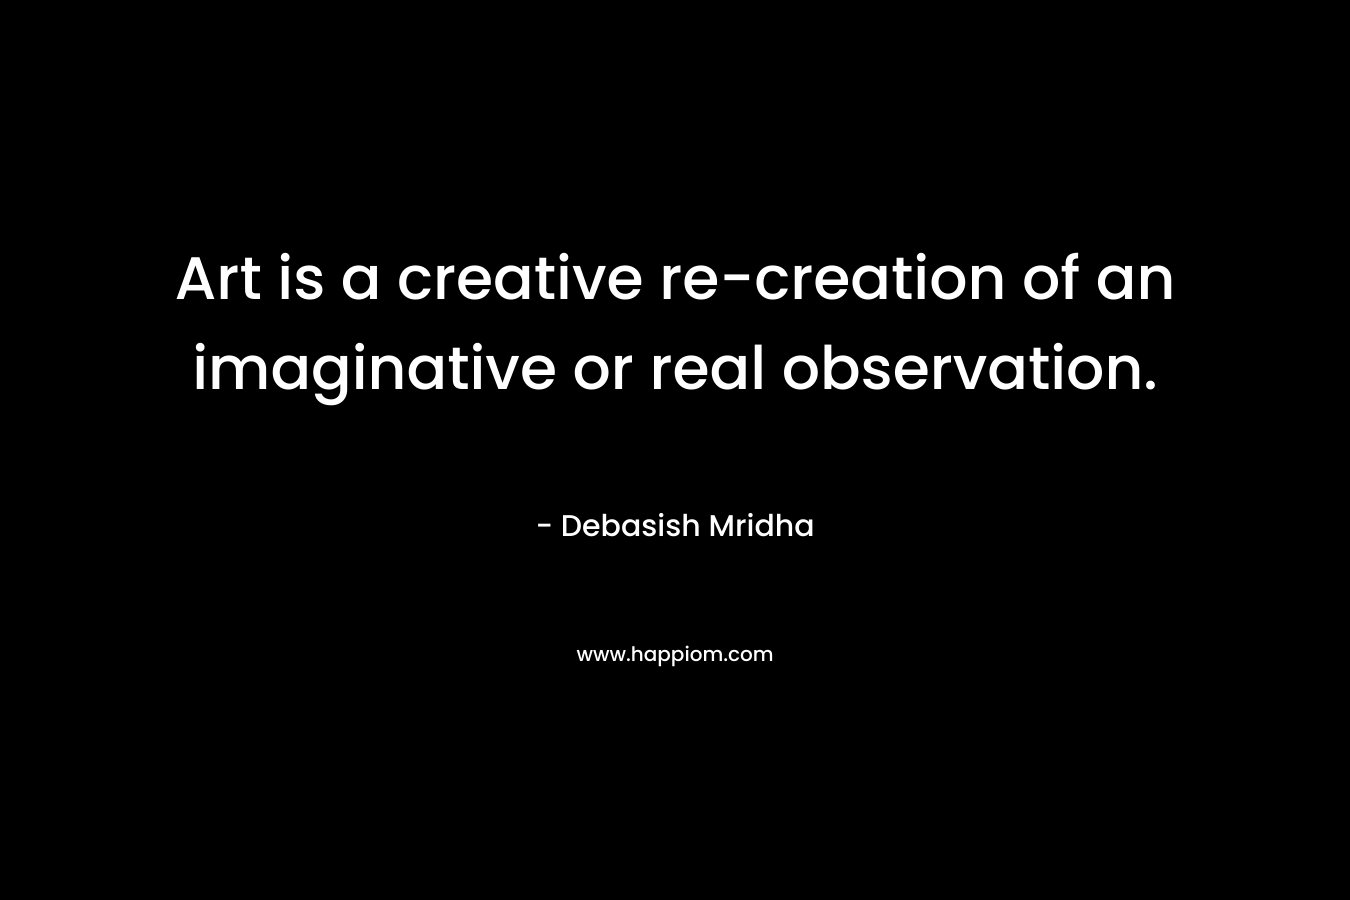 Art is a creative re-creation of an imaginative or real observation.